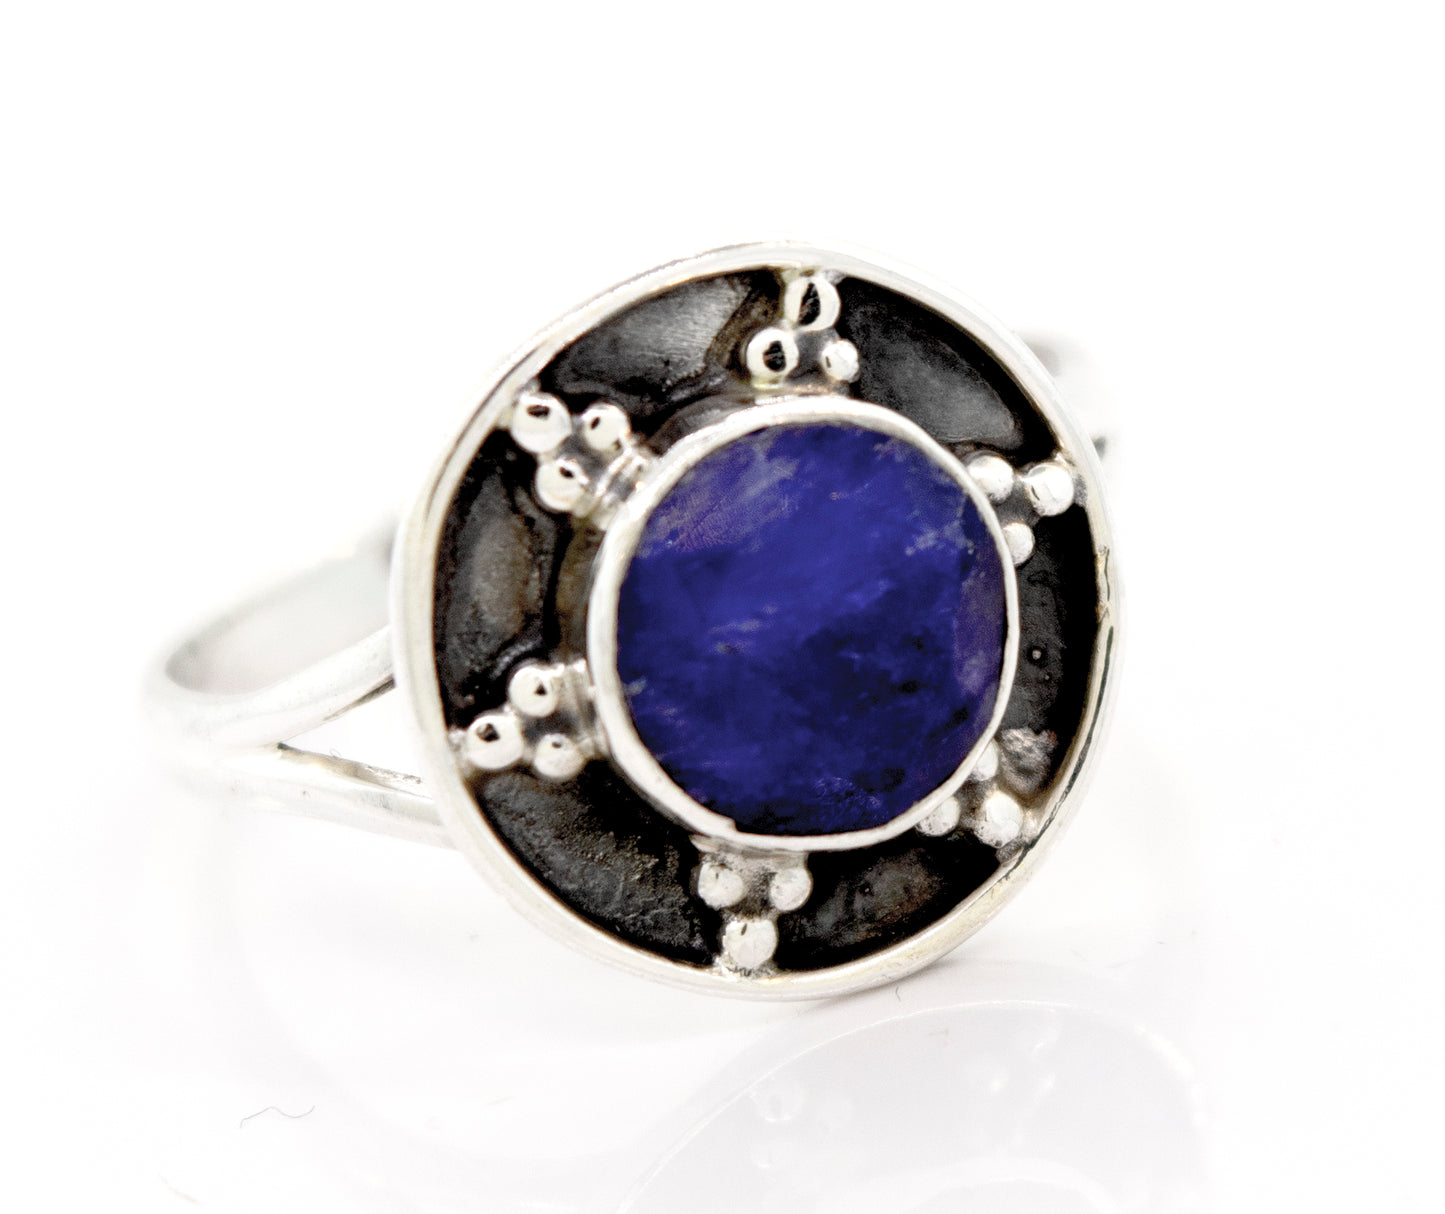 A Sapphire Ring With Unique Oxidized Silver Design by Super Silver, with a lapis stone in the center.